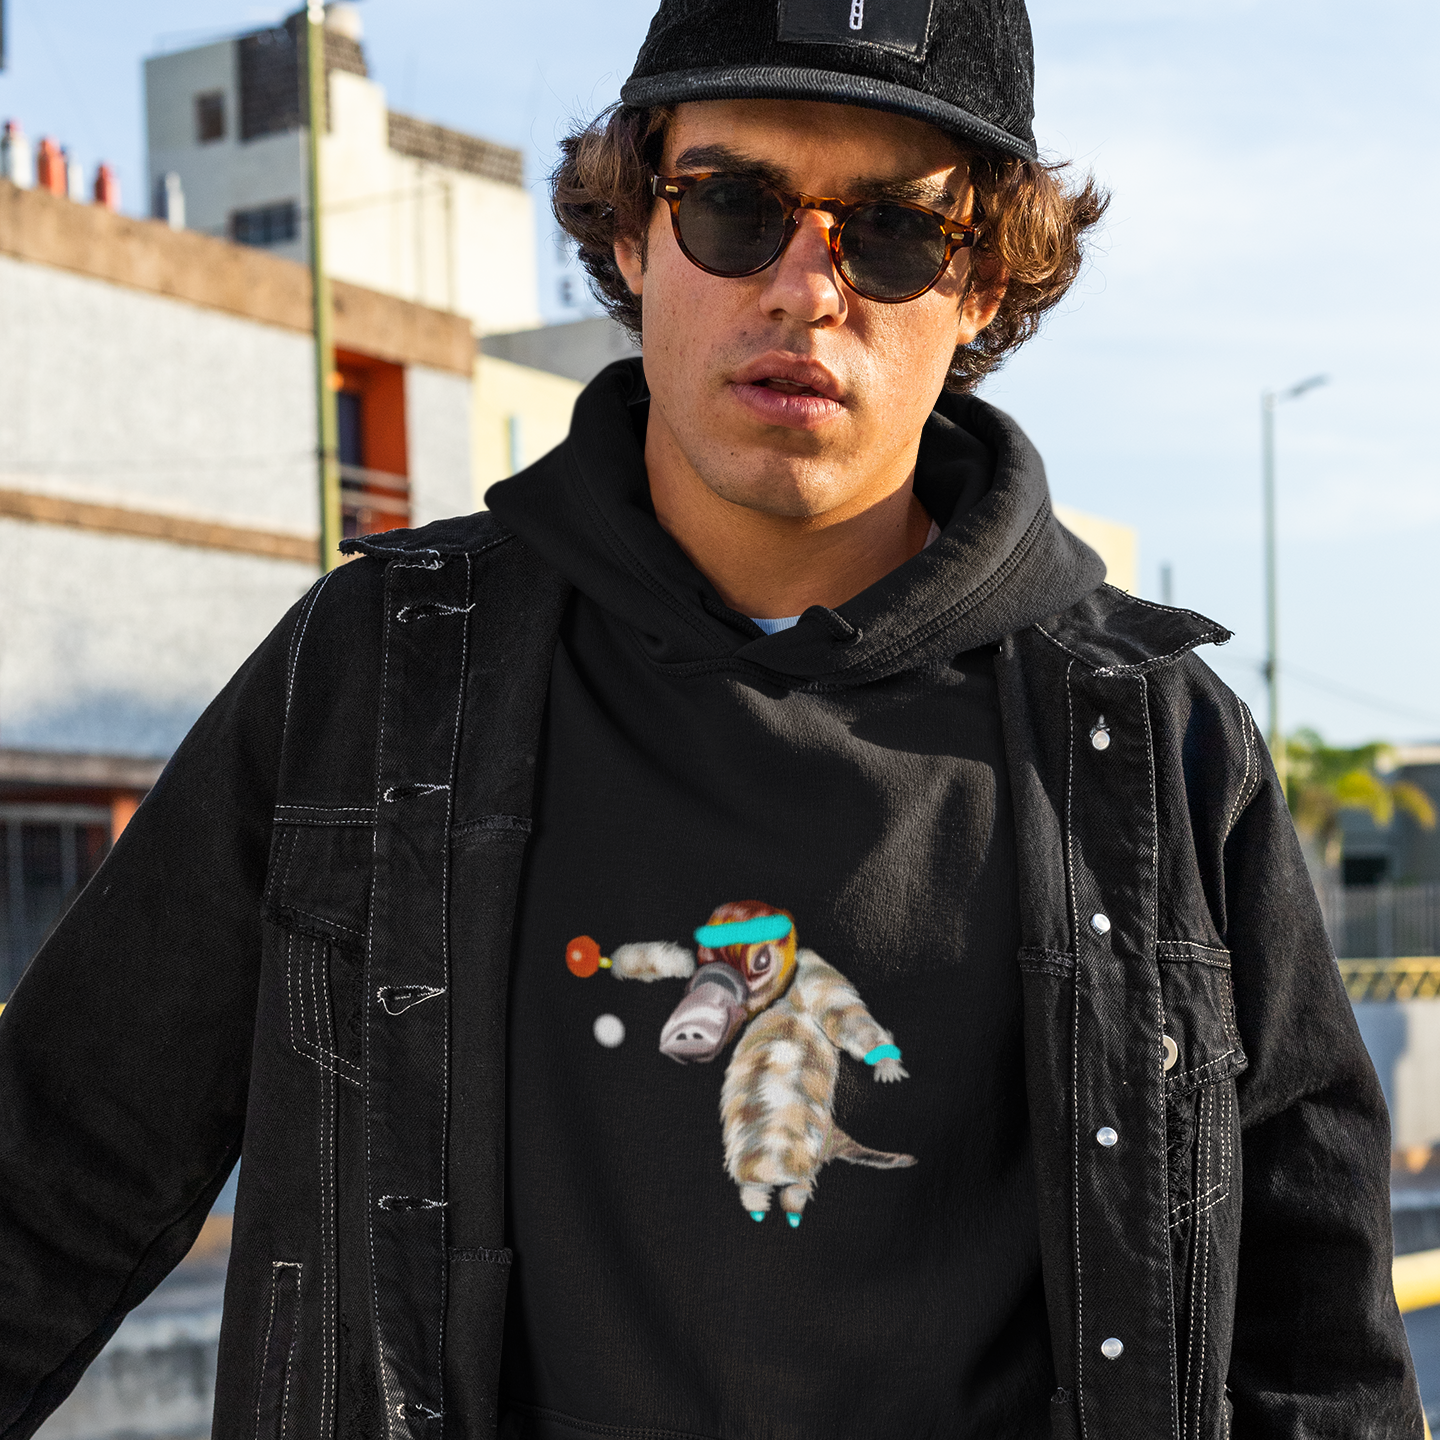 Ping Pong Platypus | Sustainable Hoodie worn by a man